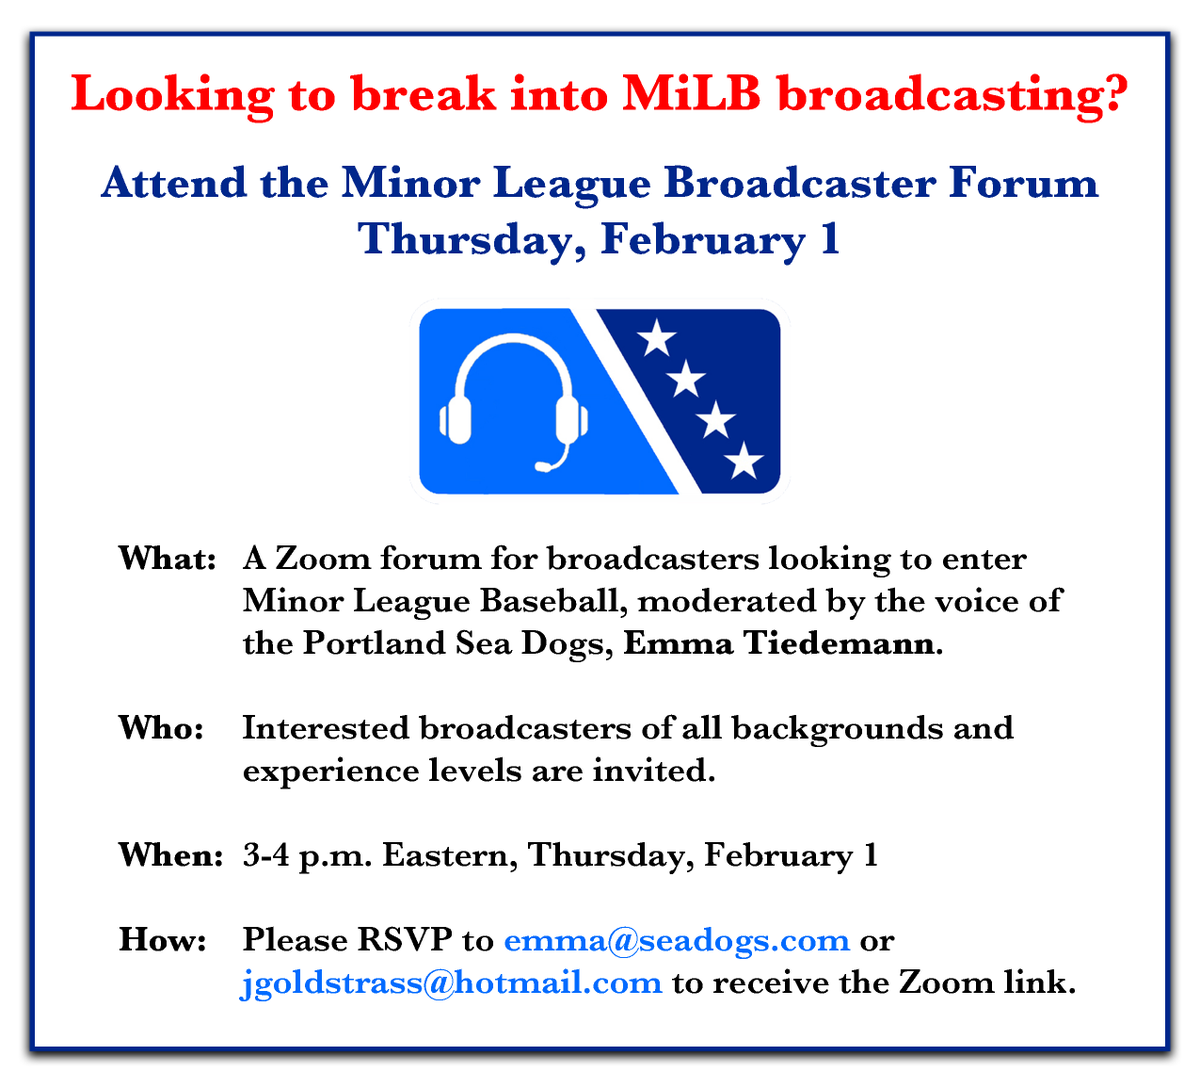 For all interested baseball broadcasters looking to break into Minor League Baseball: We're holding a Broadcaster Forum on Thursday, February 1, moderated by @emmatieds.